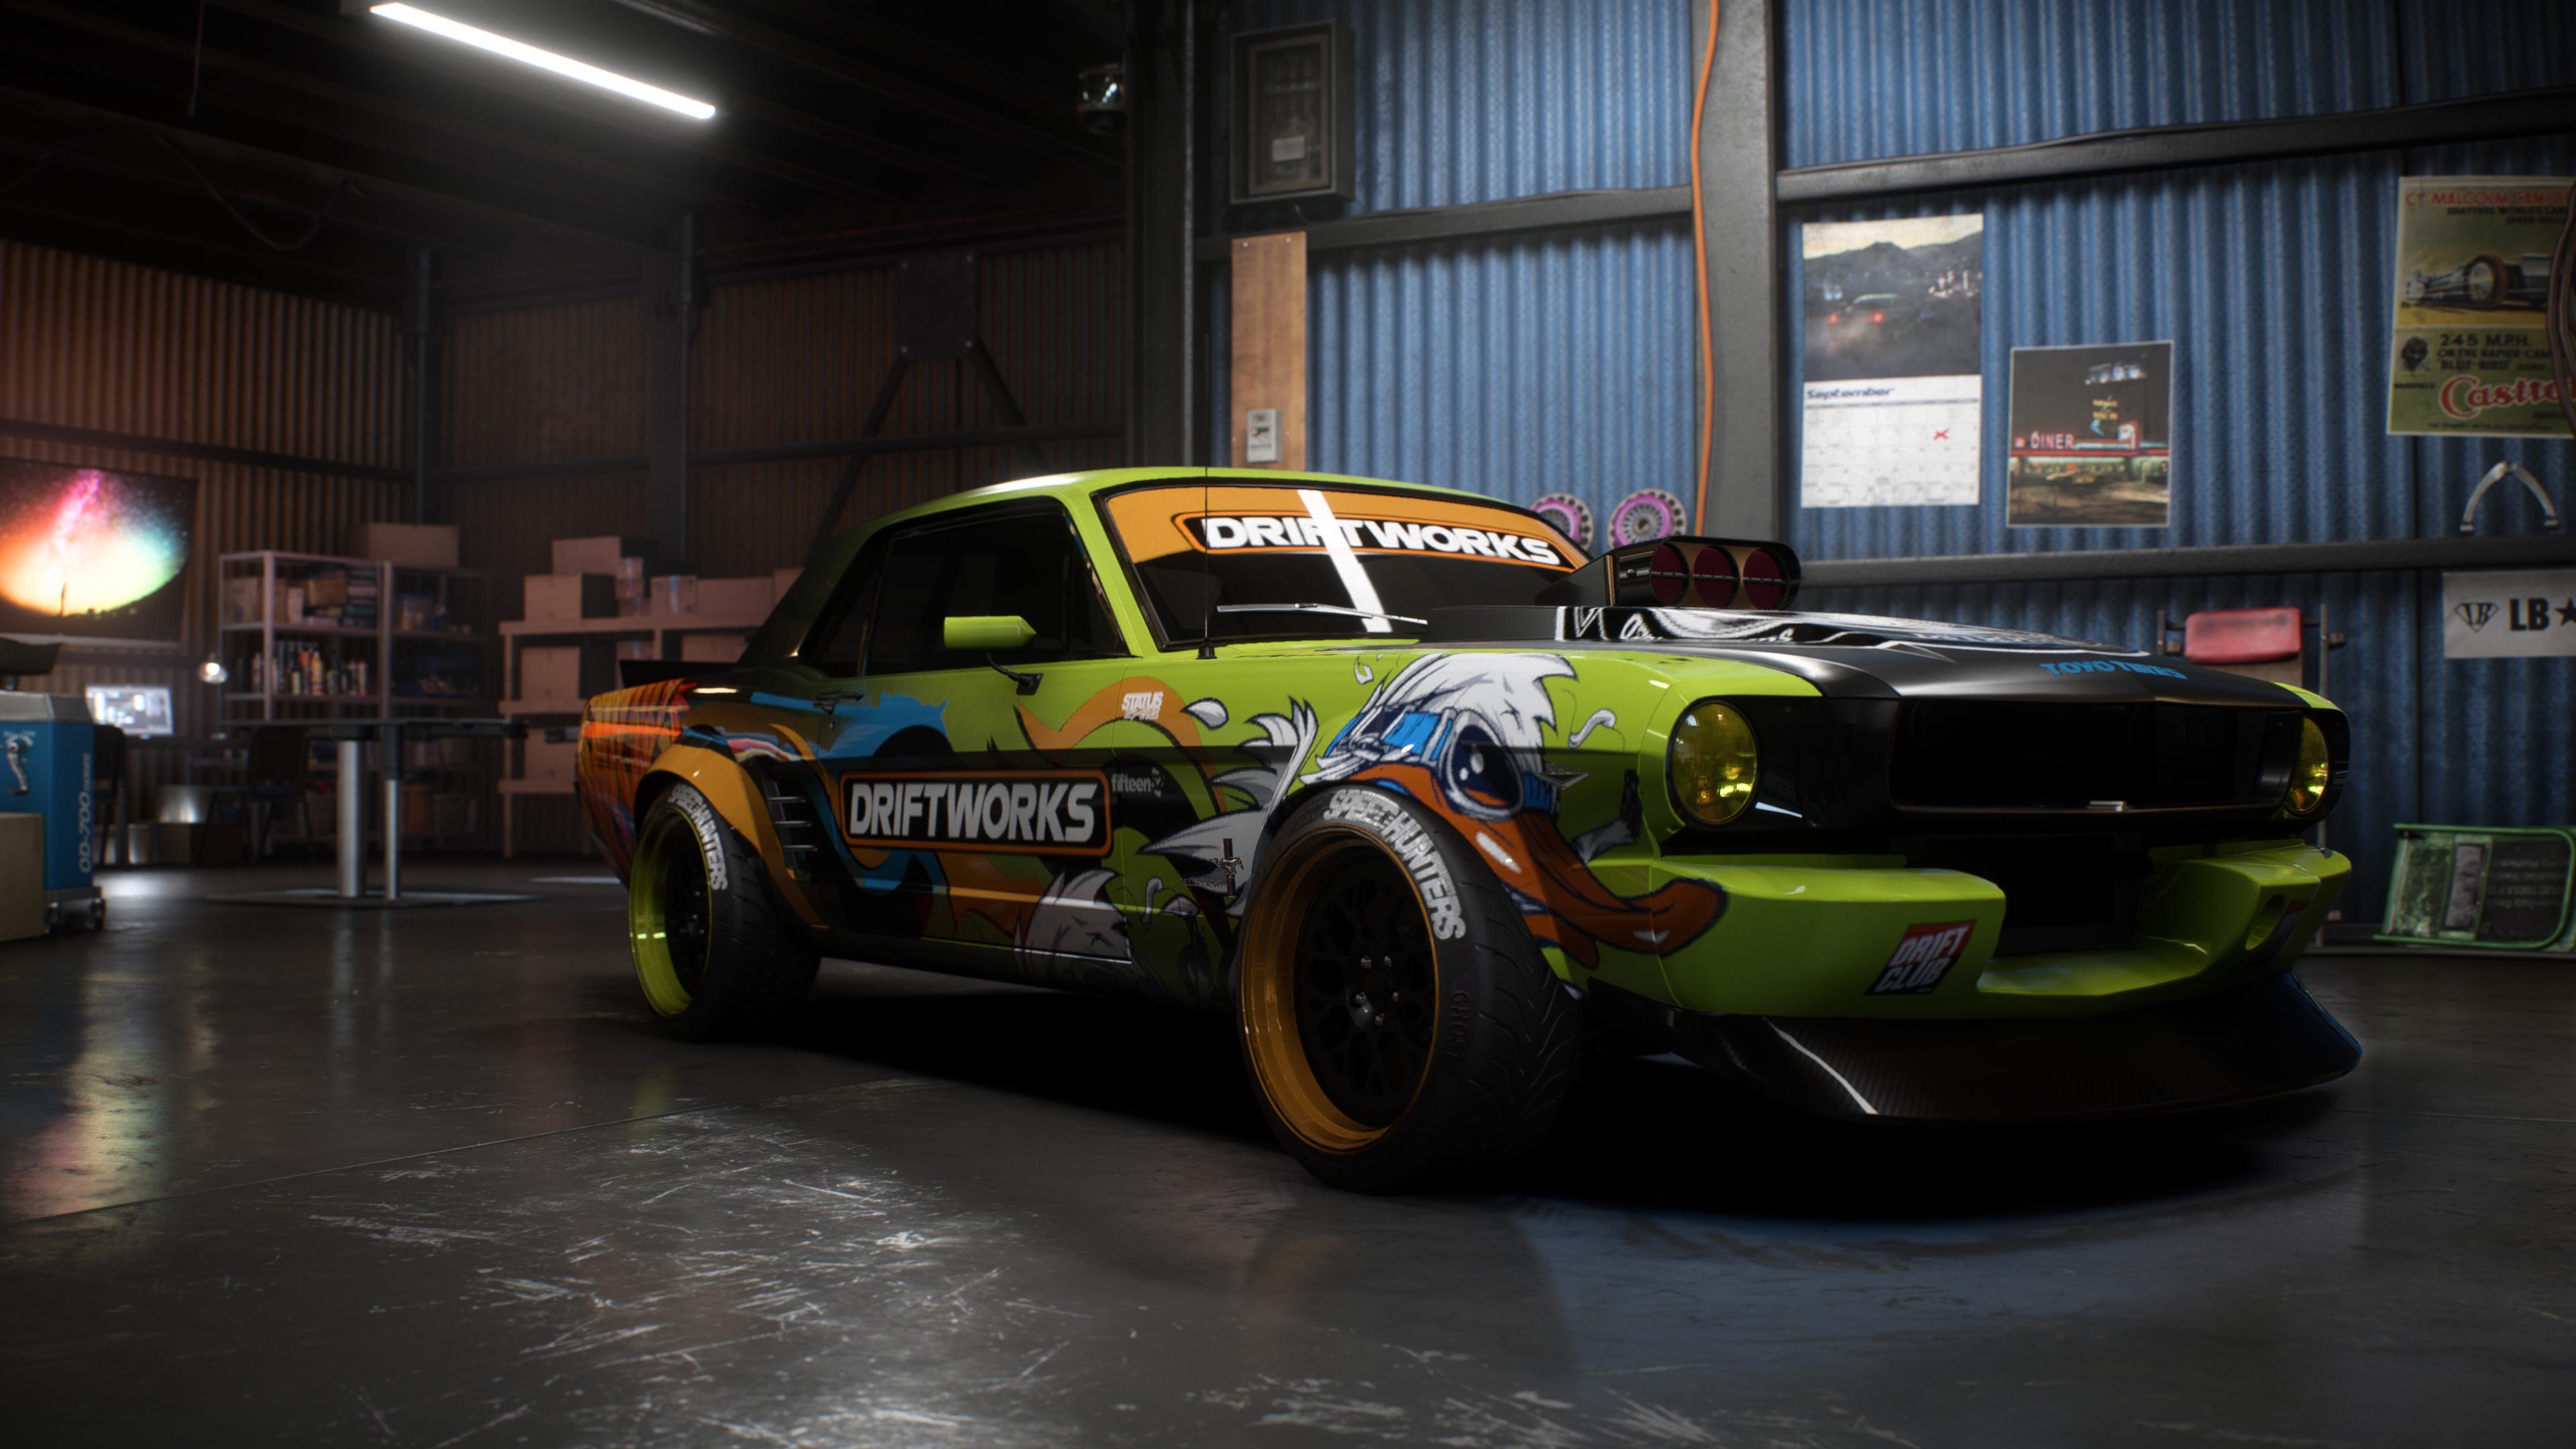 Мустанг payback. Ford Mustang 1965 NFS Payback. Реликвия Ford Mustang 1965. Ford Mustang 1965 Payback. Need for Speed Payback Mustang 1965.